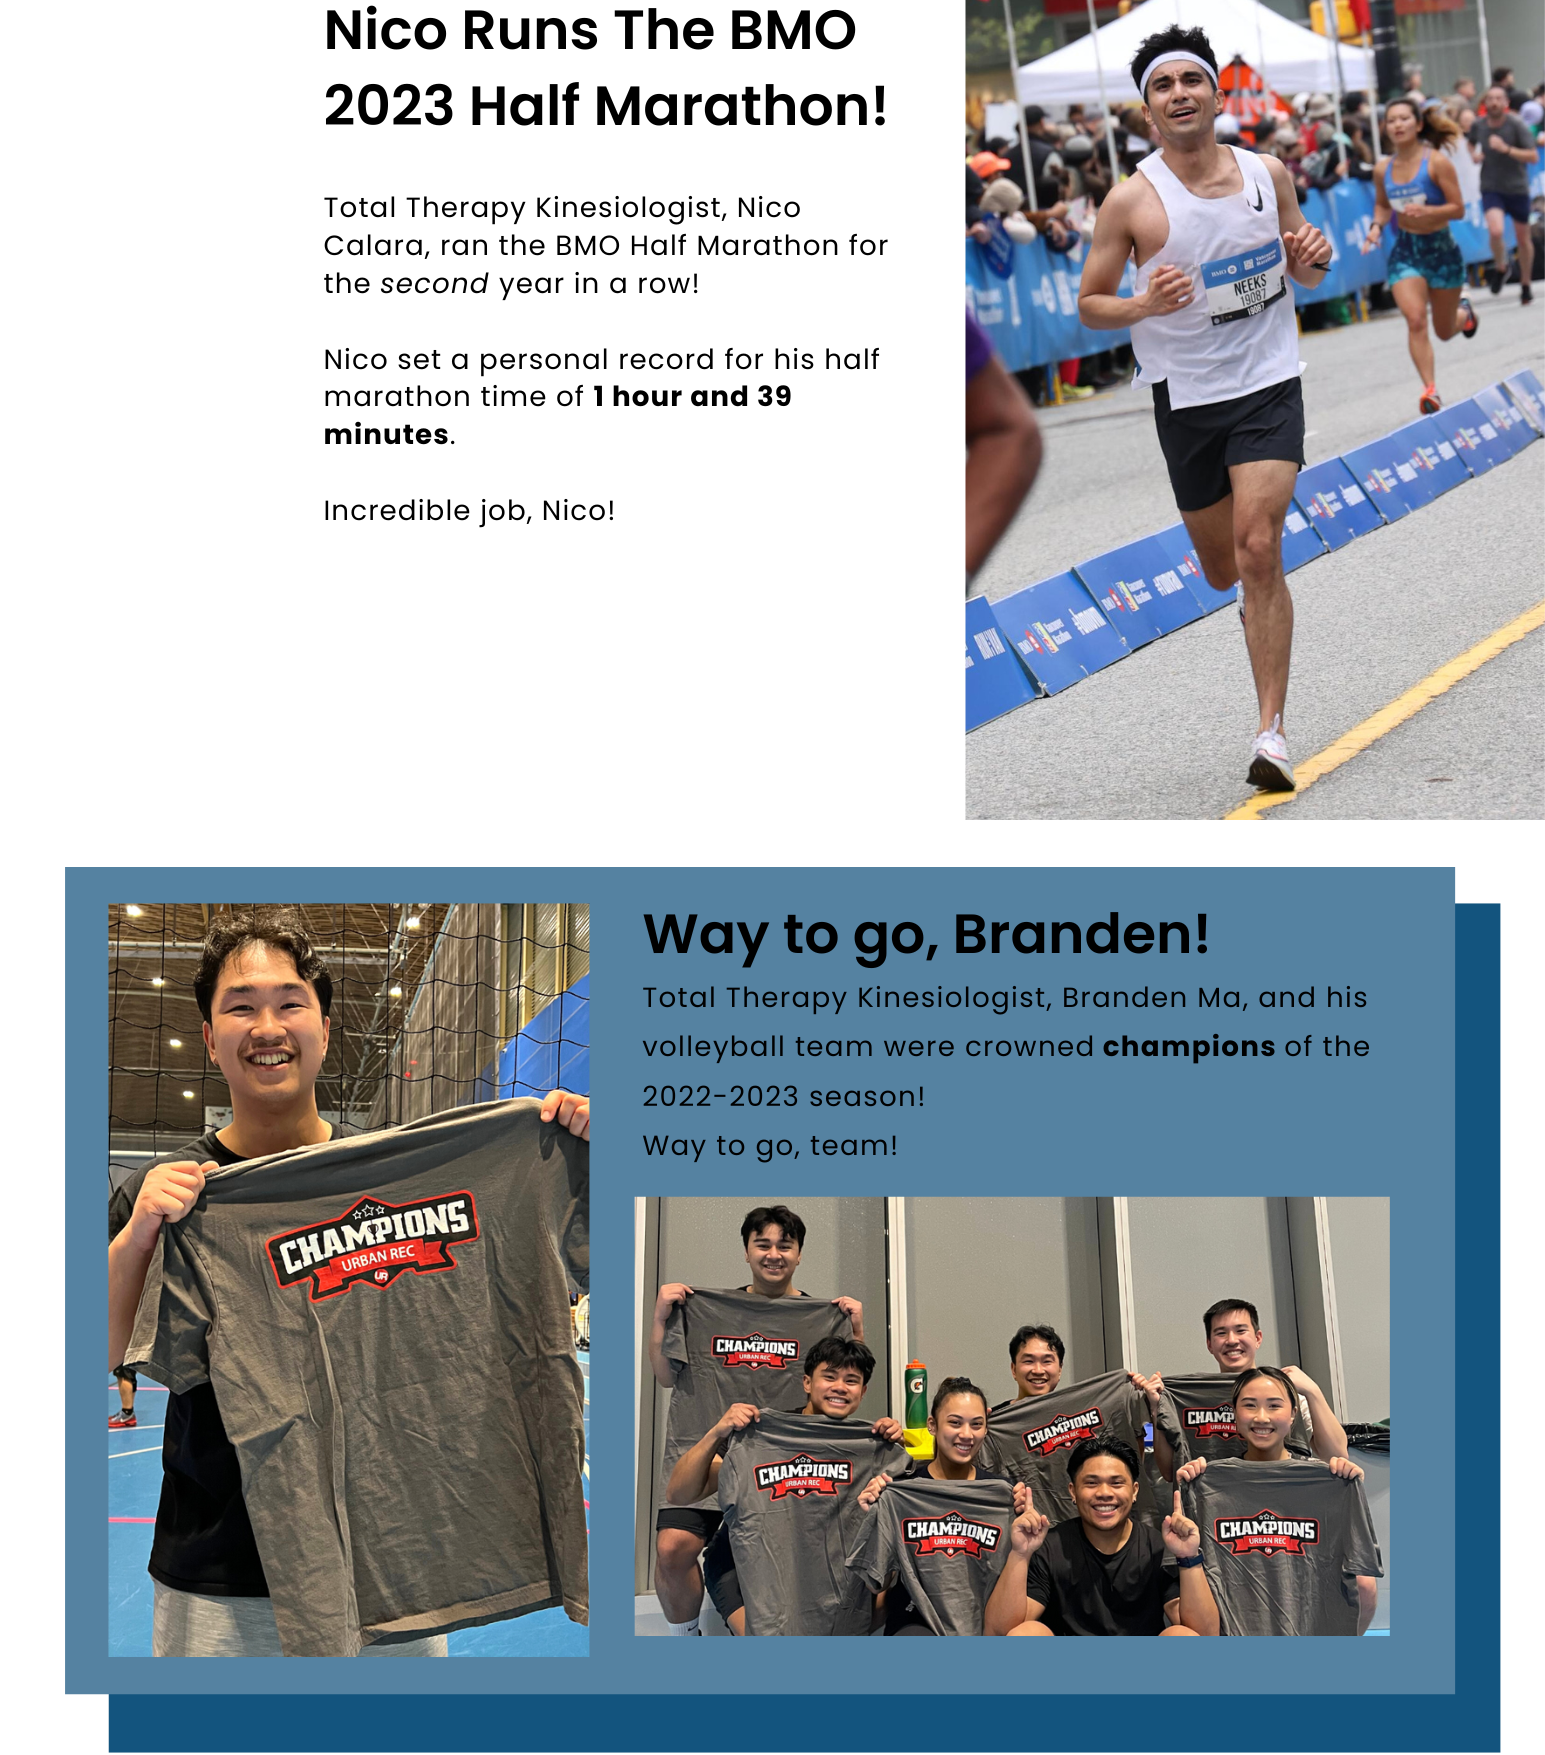 Nico Runs The BMO 2023 Half Marathon! Total Therapy Kinesiologist, Nico Calara, ran the BMO Half Marathon for the second year in a row! Nico set a personal record for his half marathon time of 1 hour and 39 minutes. Incredible job, Nico! Way to go, Branden! Total Therapy Kinesiologist, Branden Ma, and his volleyball team were crowned champions of the 2022-2023 season! Way to go, team!